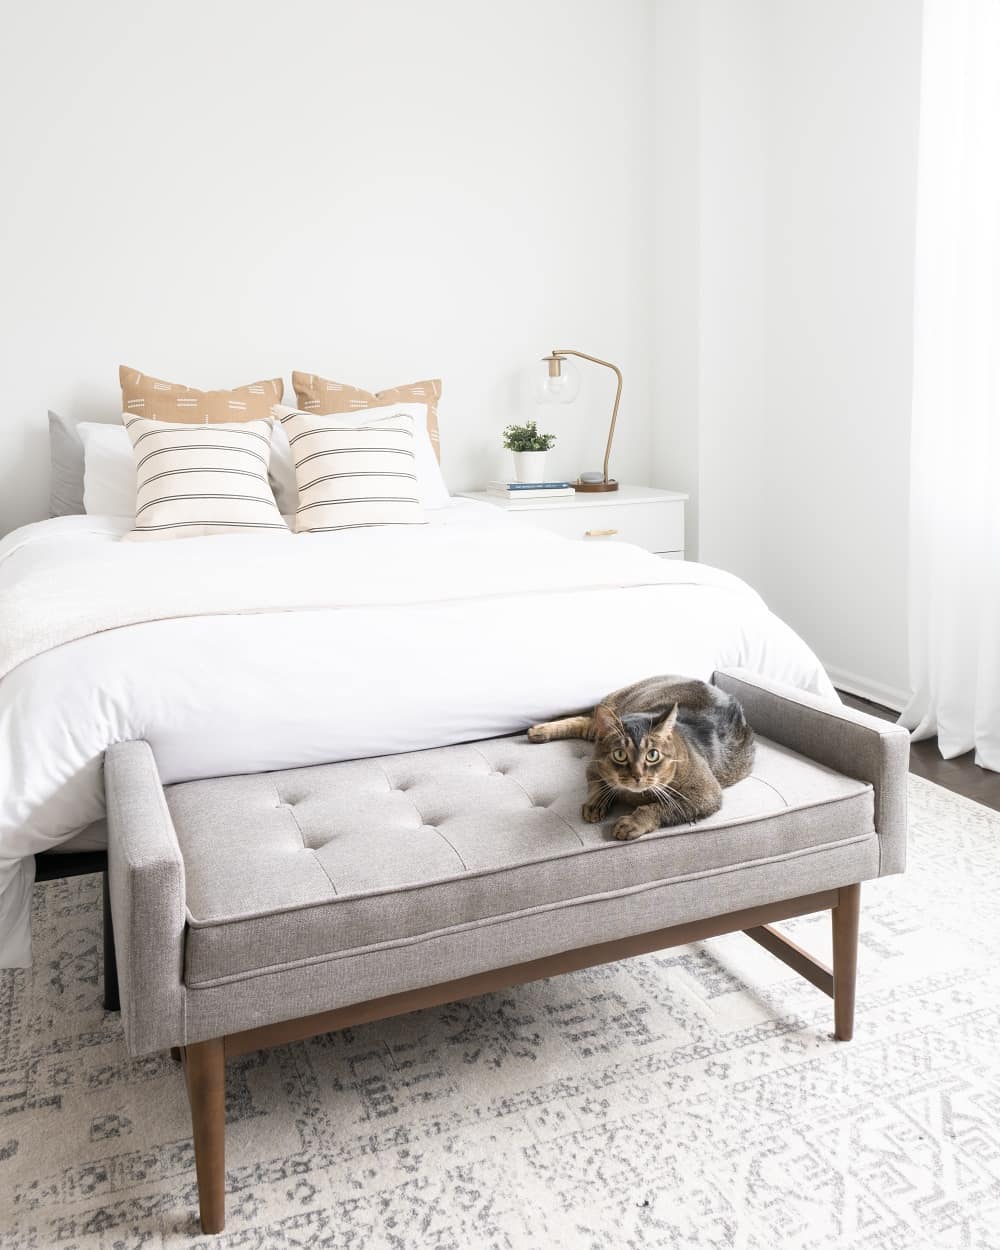 White bedroom with white bed and cat on gray bench. Photo by Instagram user @vivandtim.home